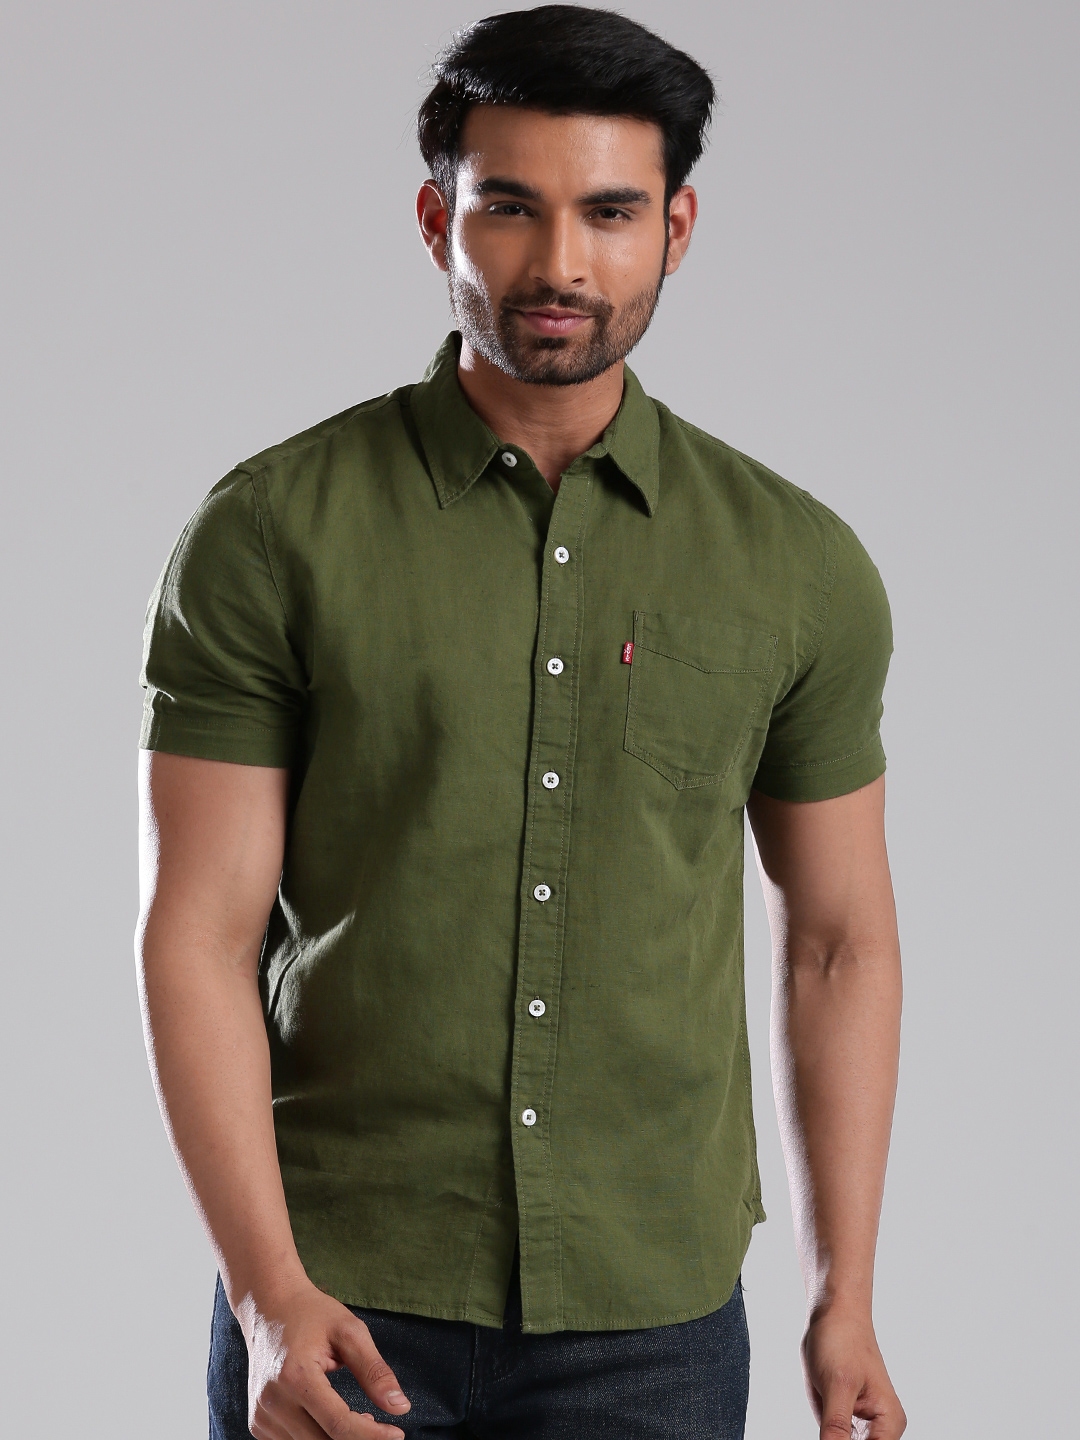 Buy Levi's Olive Green Slim Fit Casual Shirt - Shirts for Men 1424116 |  Myntra